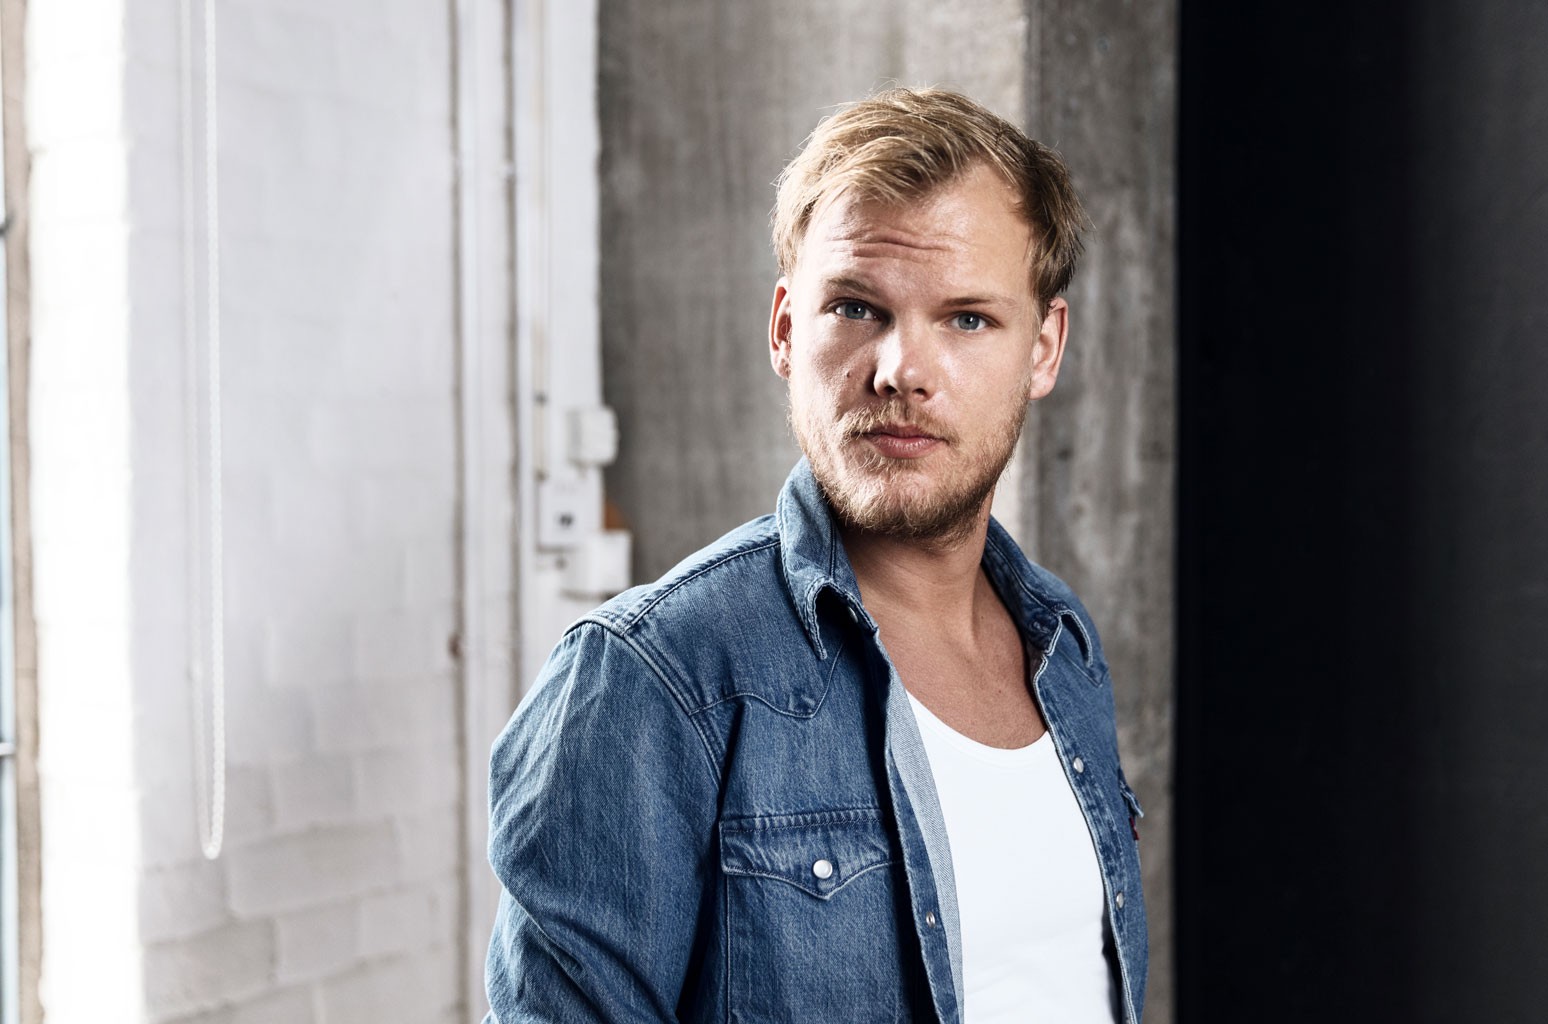 Avicii Has Just Been Nominated For 2020’s Top Dance/Electronic Artist